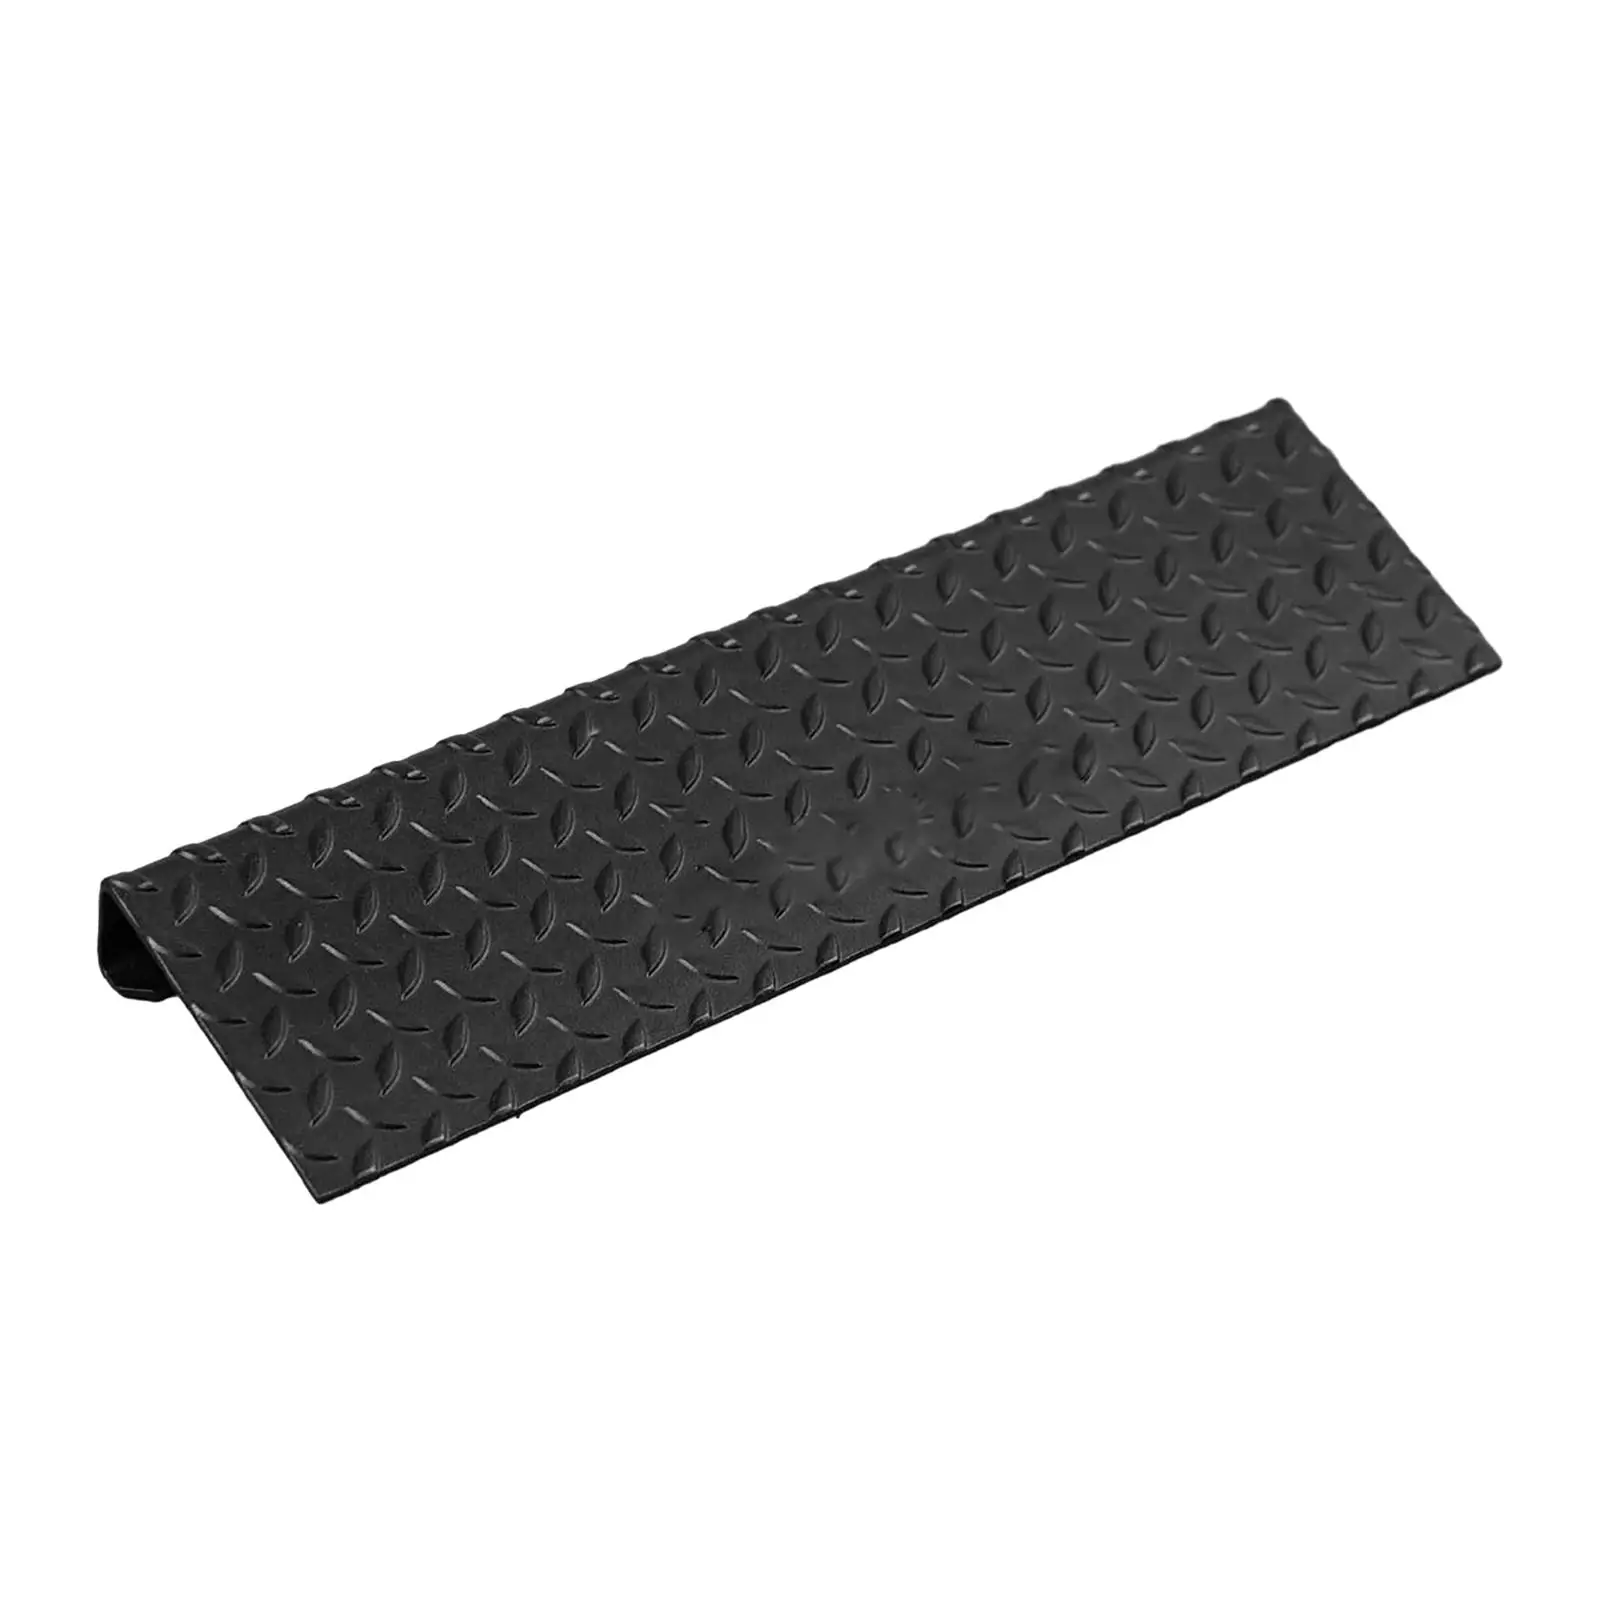 Slant Board Calf Stretcher Stretch Boards Sports Exercise Professional Ankle Joint Correction Muscle Building Foot Incline Board